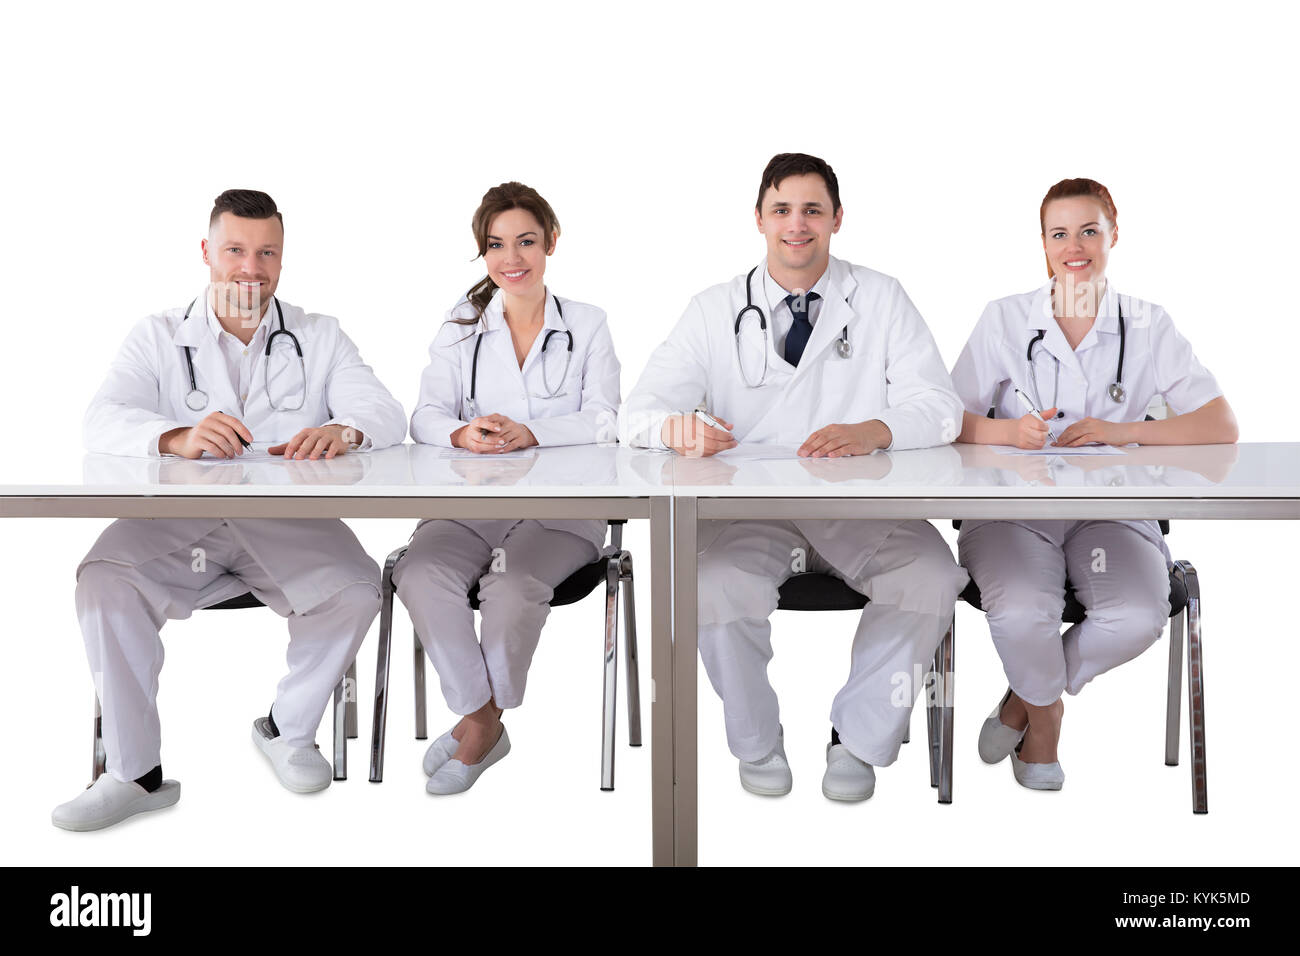 Portrait Of Confident Male And Female Doctors Against White Background Stock Photo